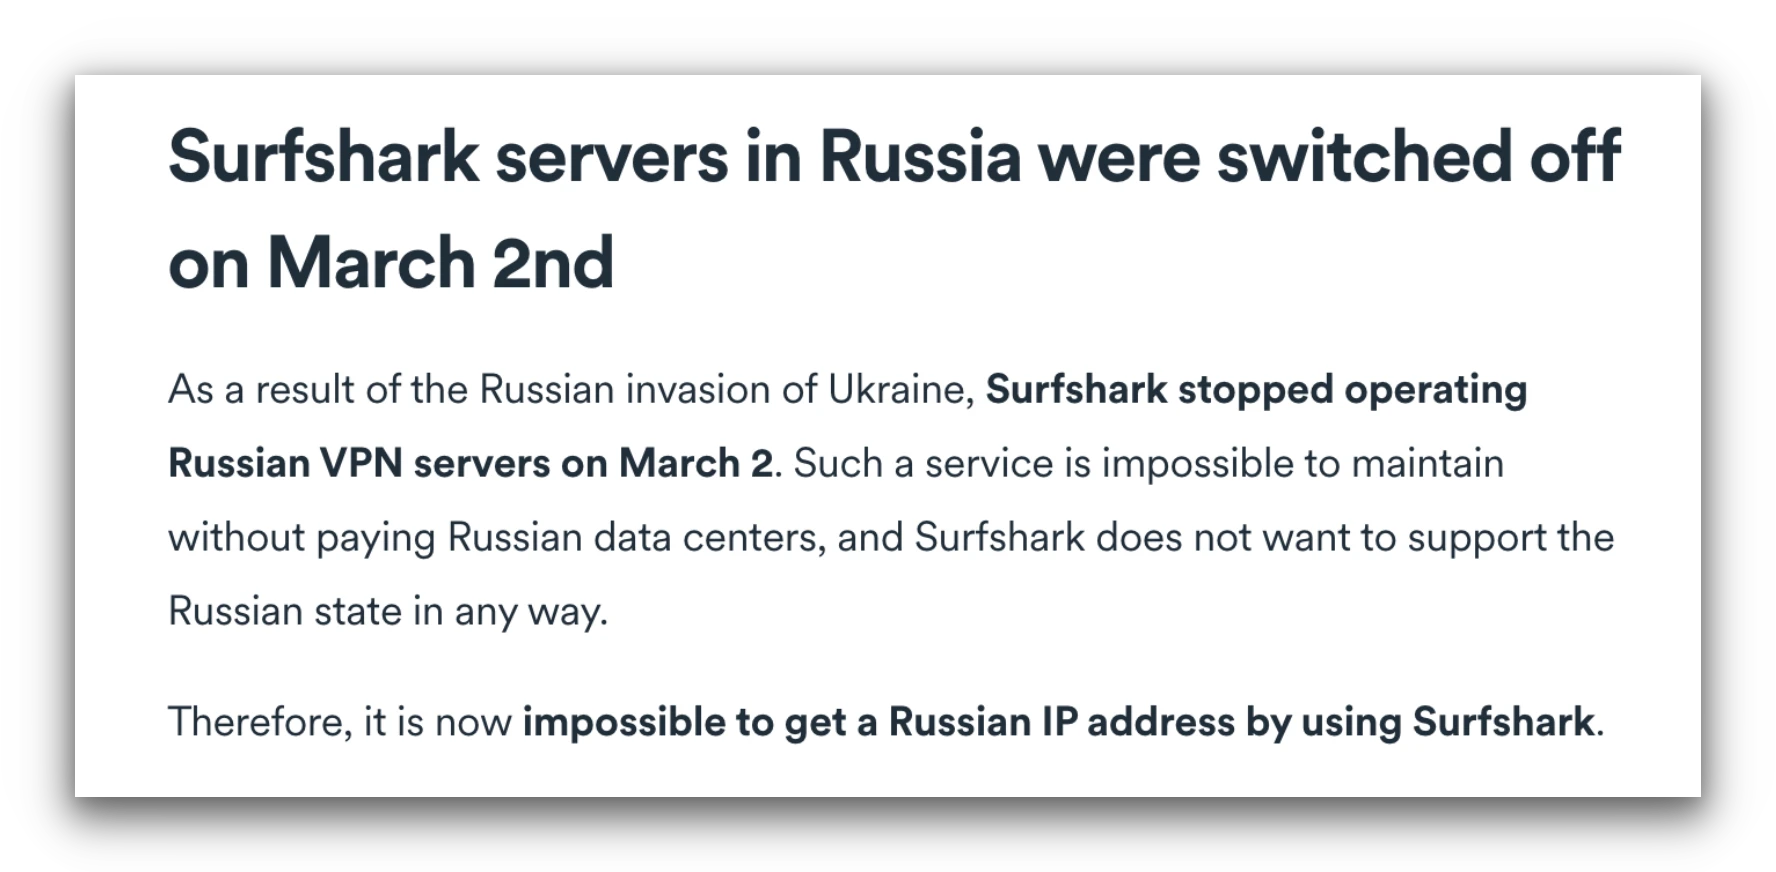 Screenshot of Surfshark's statement on its website addressing the removal of its Russia servers